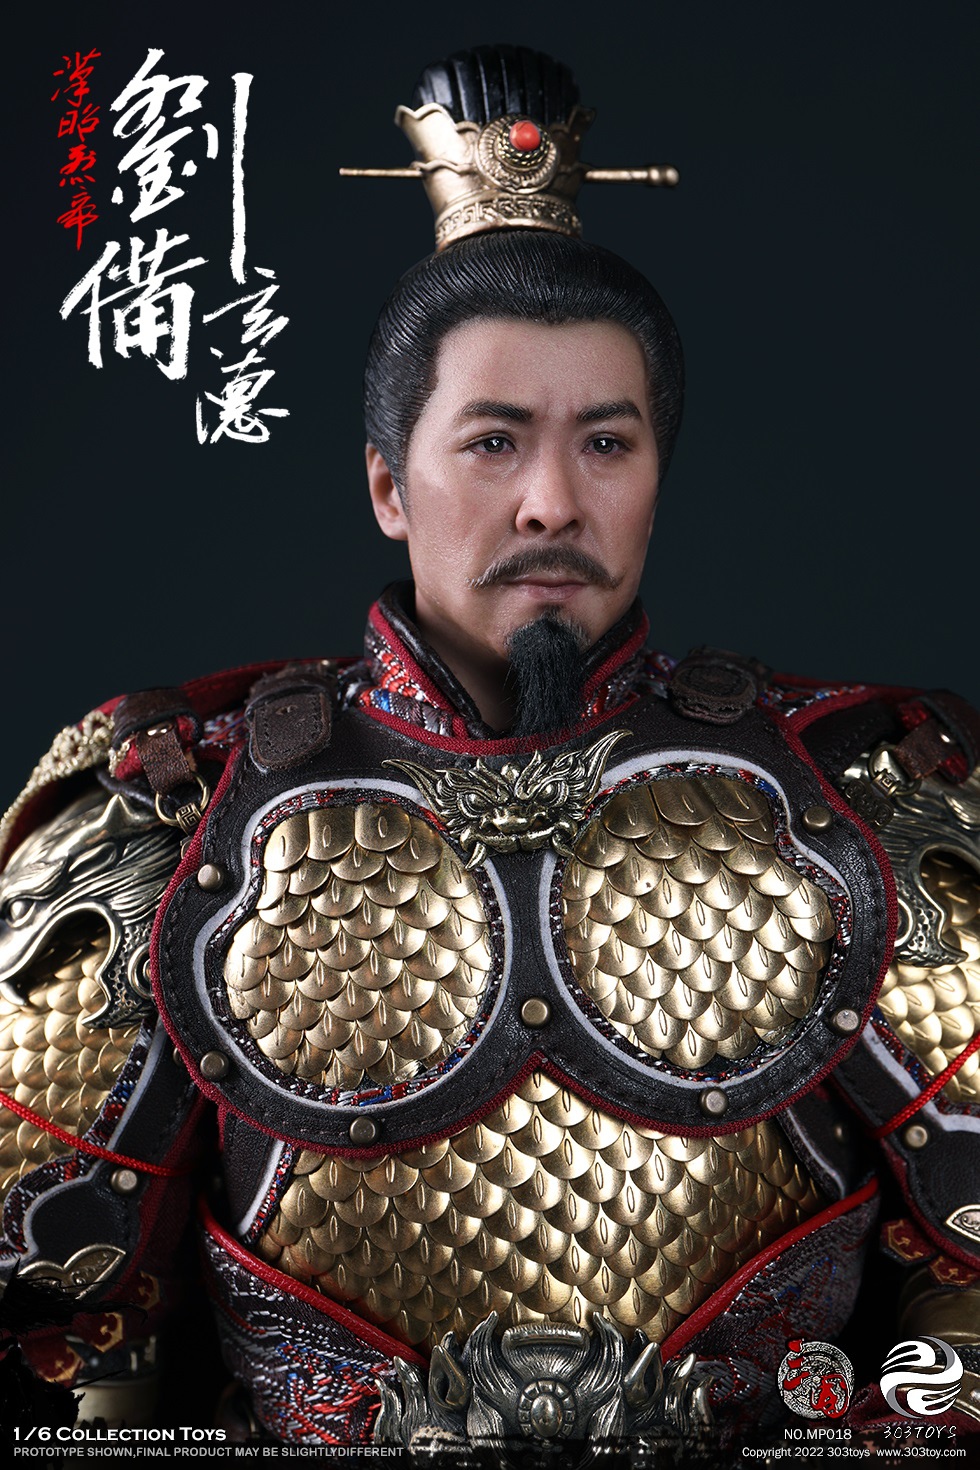 303TOYS - NEW PRODUCT: 303Toys: 1/6 Three Kingdoms Series-Liu Bei Xuande Pure Copper Standard Edition/Deluxe Edition, Lu Zhanma #MP018/MP019/MP020 22450110